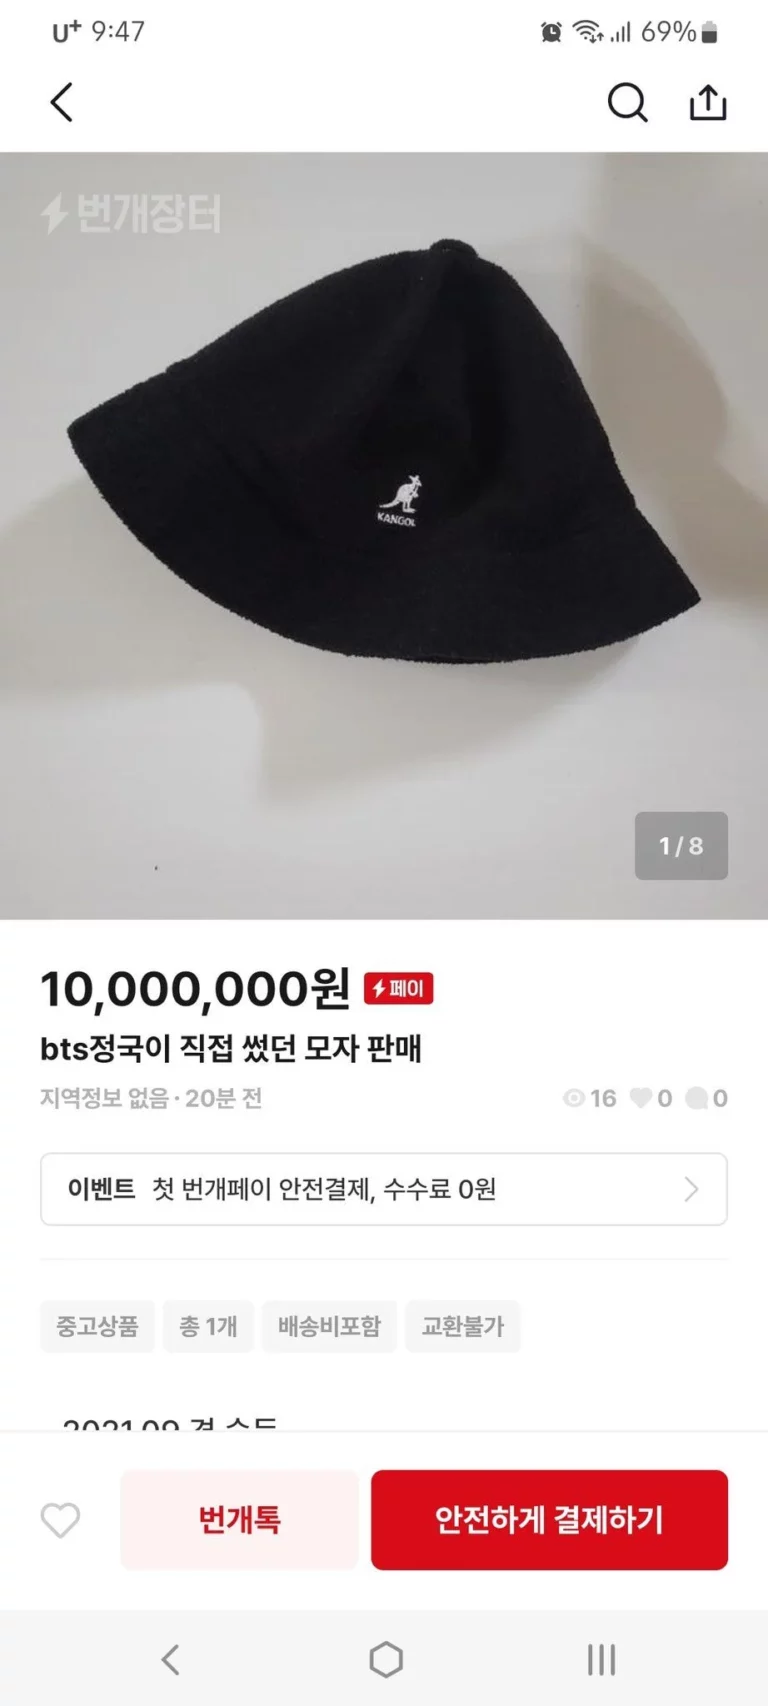 An employee of the Ministry of Foreign Affairs was caught selling BTS member's hat that was left behind for 10 million won